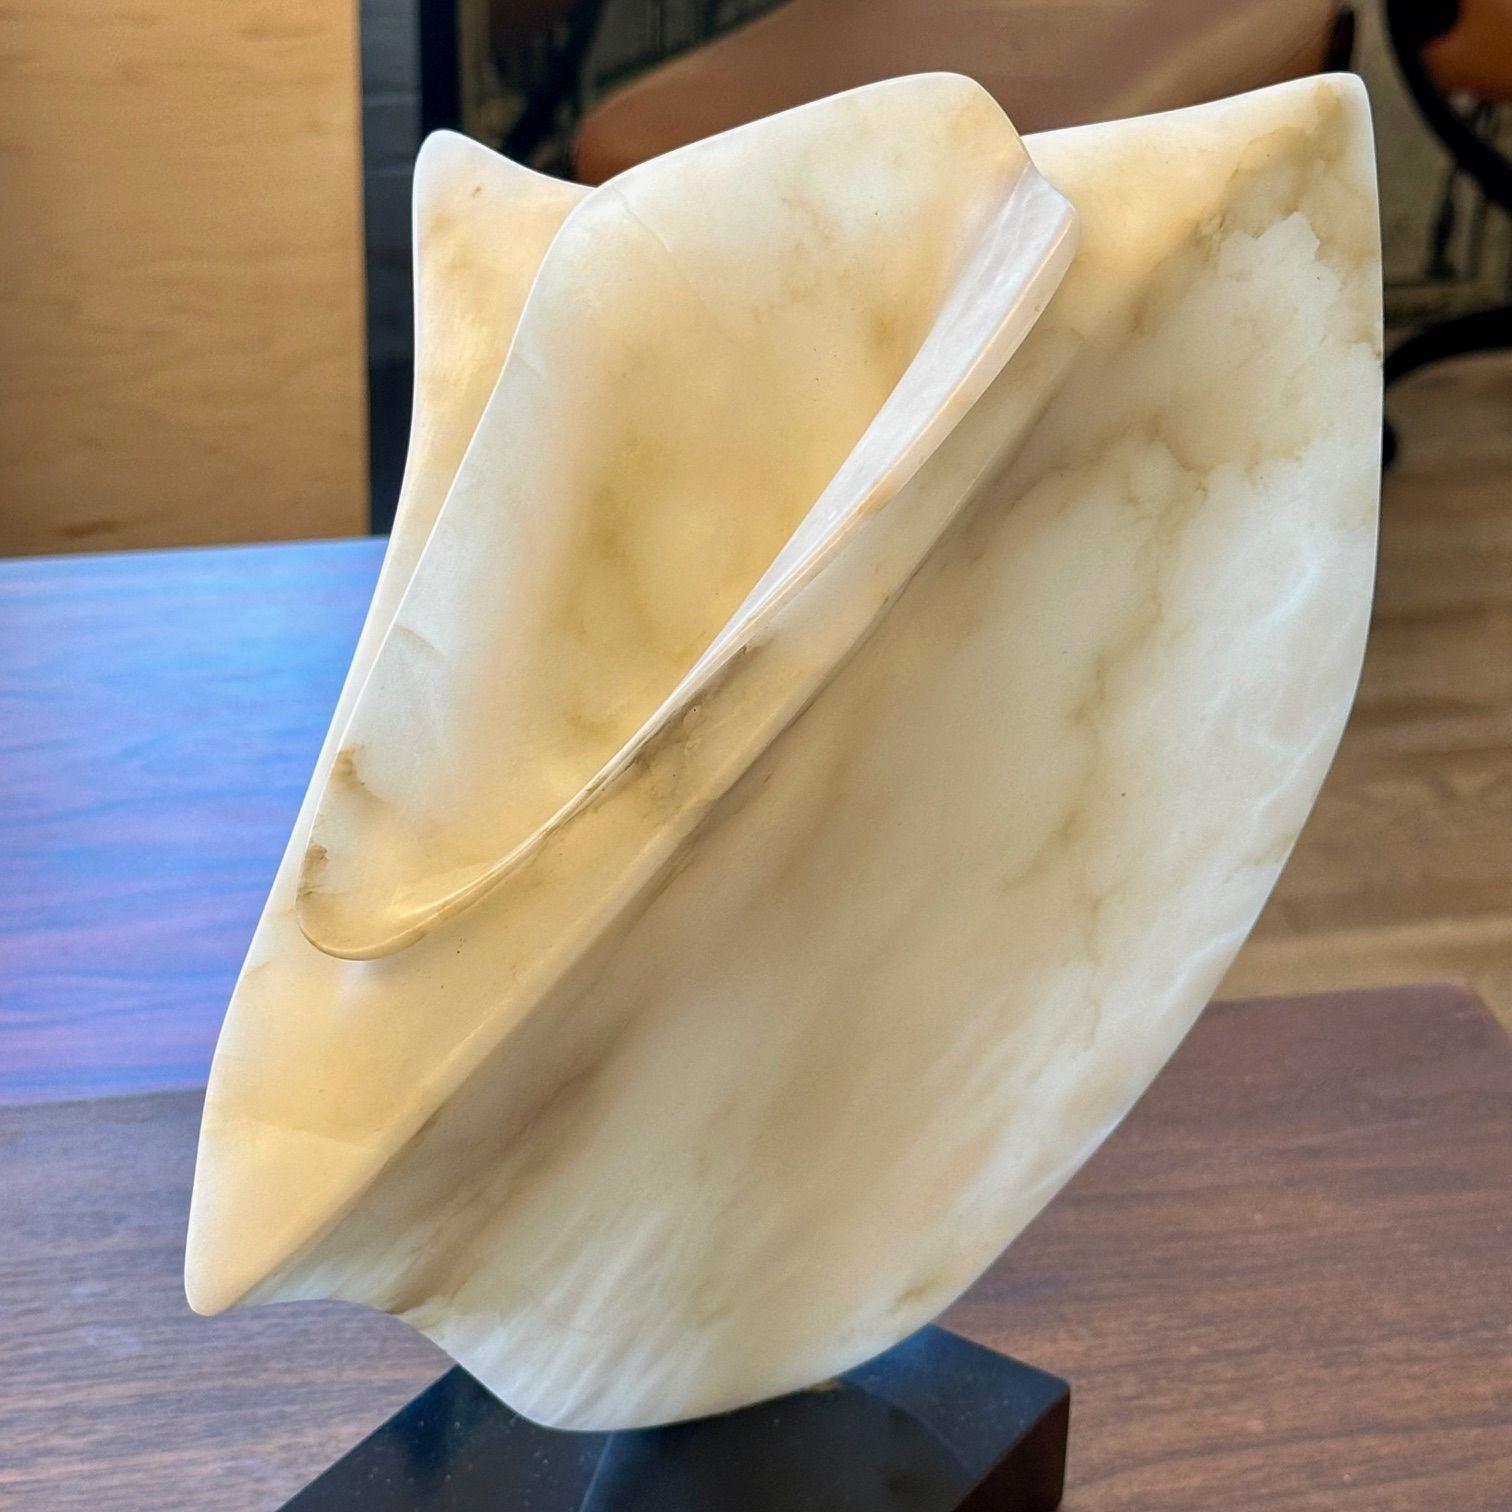 Contemporary Abstract Stone / Marble Sculpture on Base, Organic Form, 1990er Jahre (Ende des 20. Jahrhunderts) im Angebot